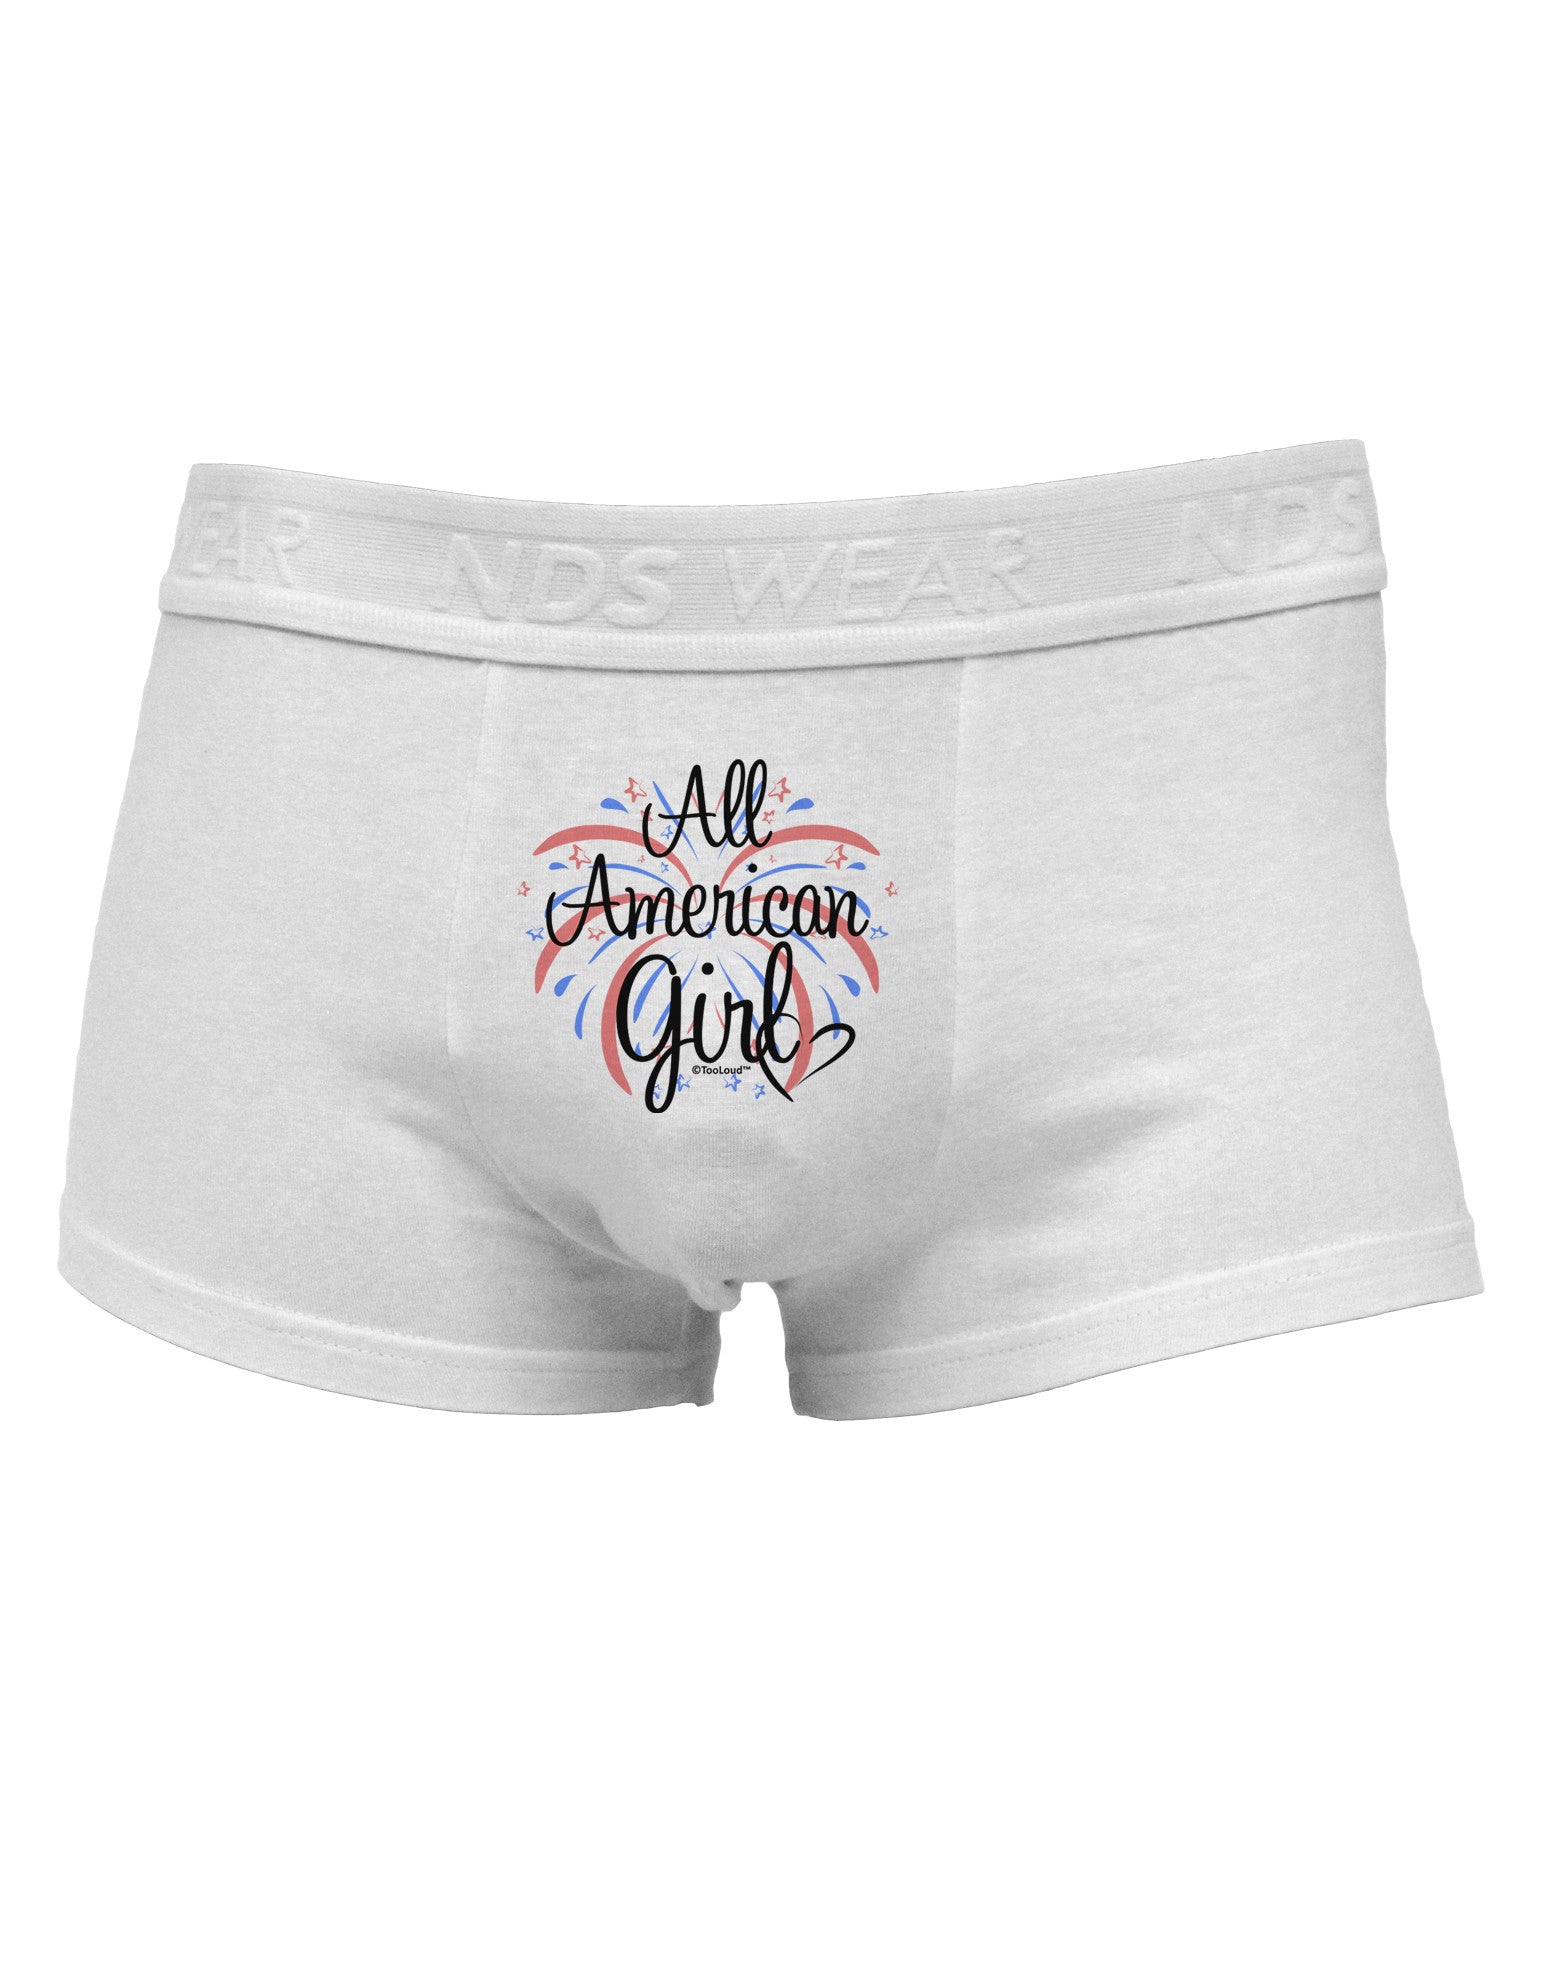 All American Girl - Fireworks and Heart Mens Cotton Trunk